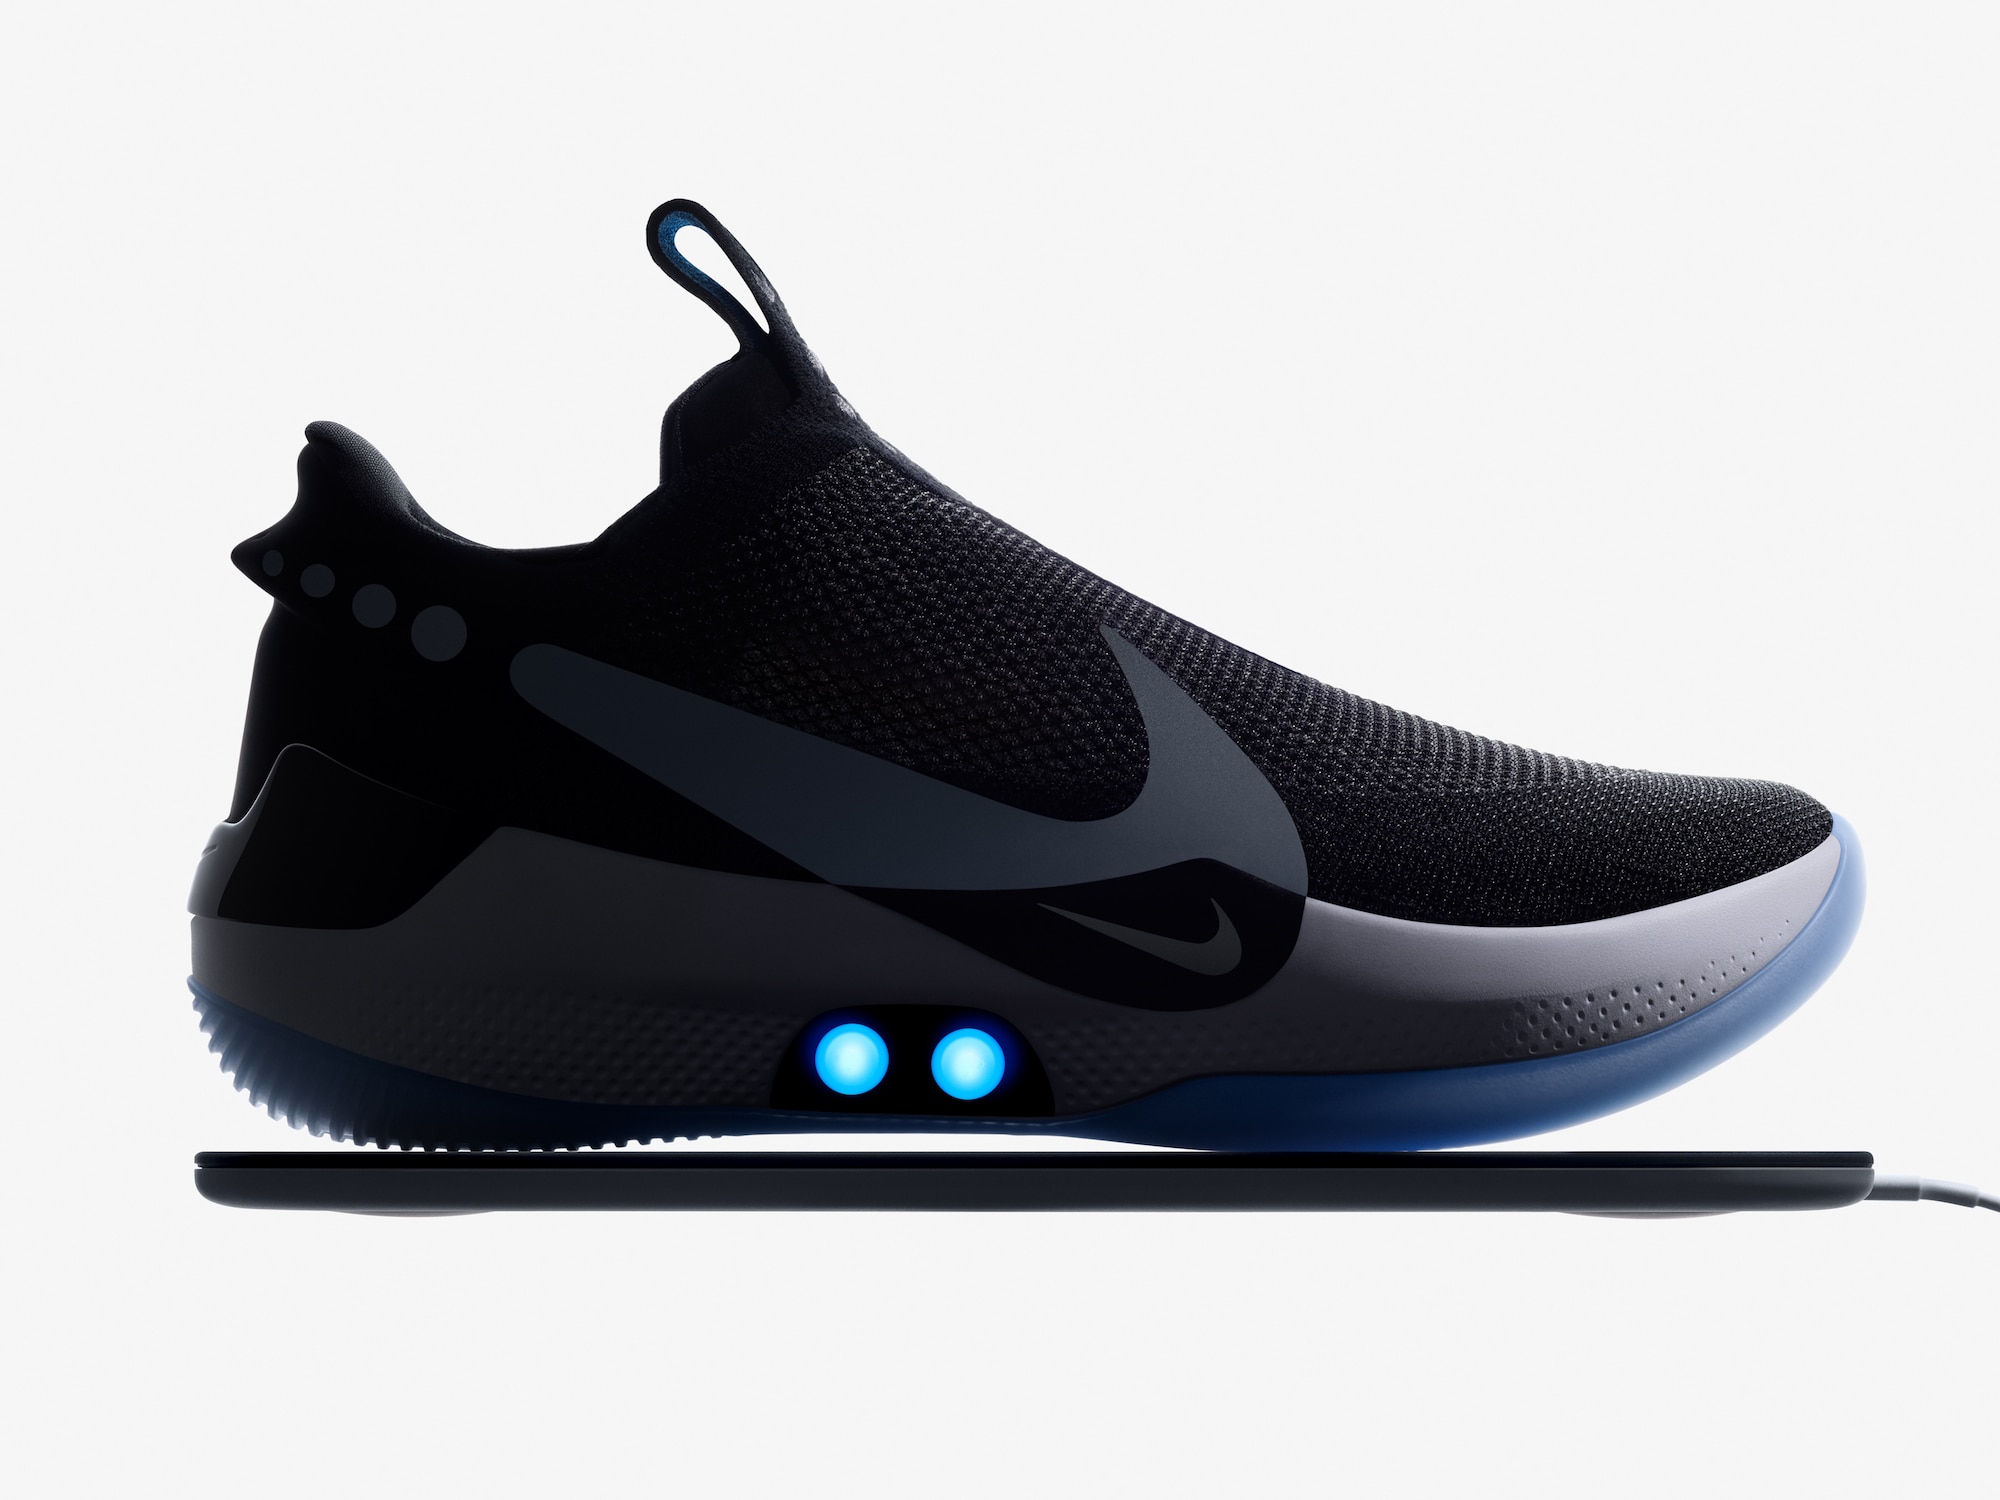 Nike Adapt BB, the connected and self-lacing basketball shoes - Domus